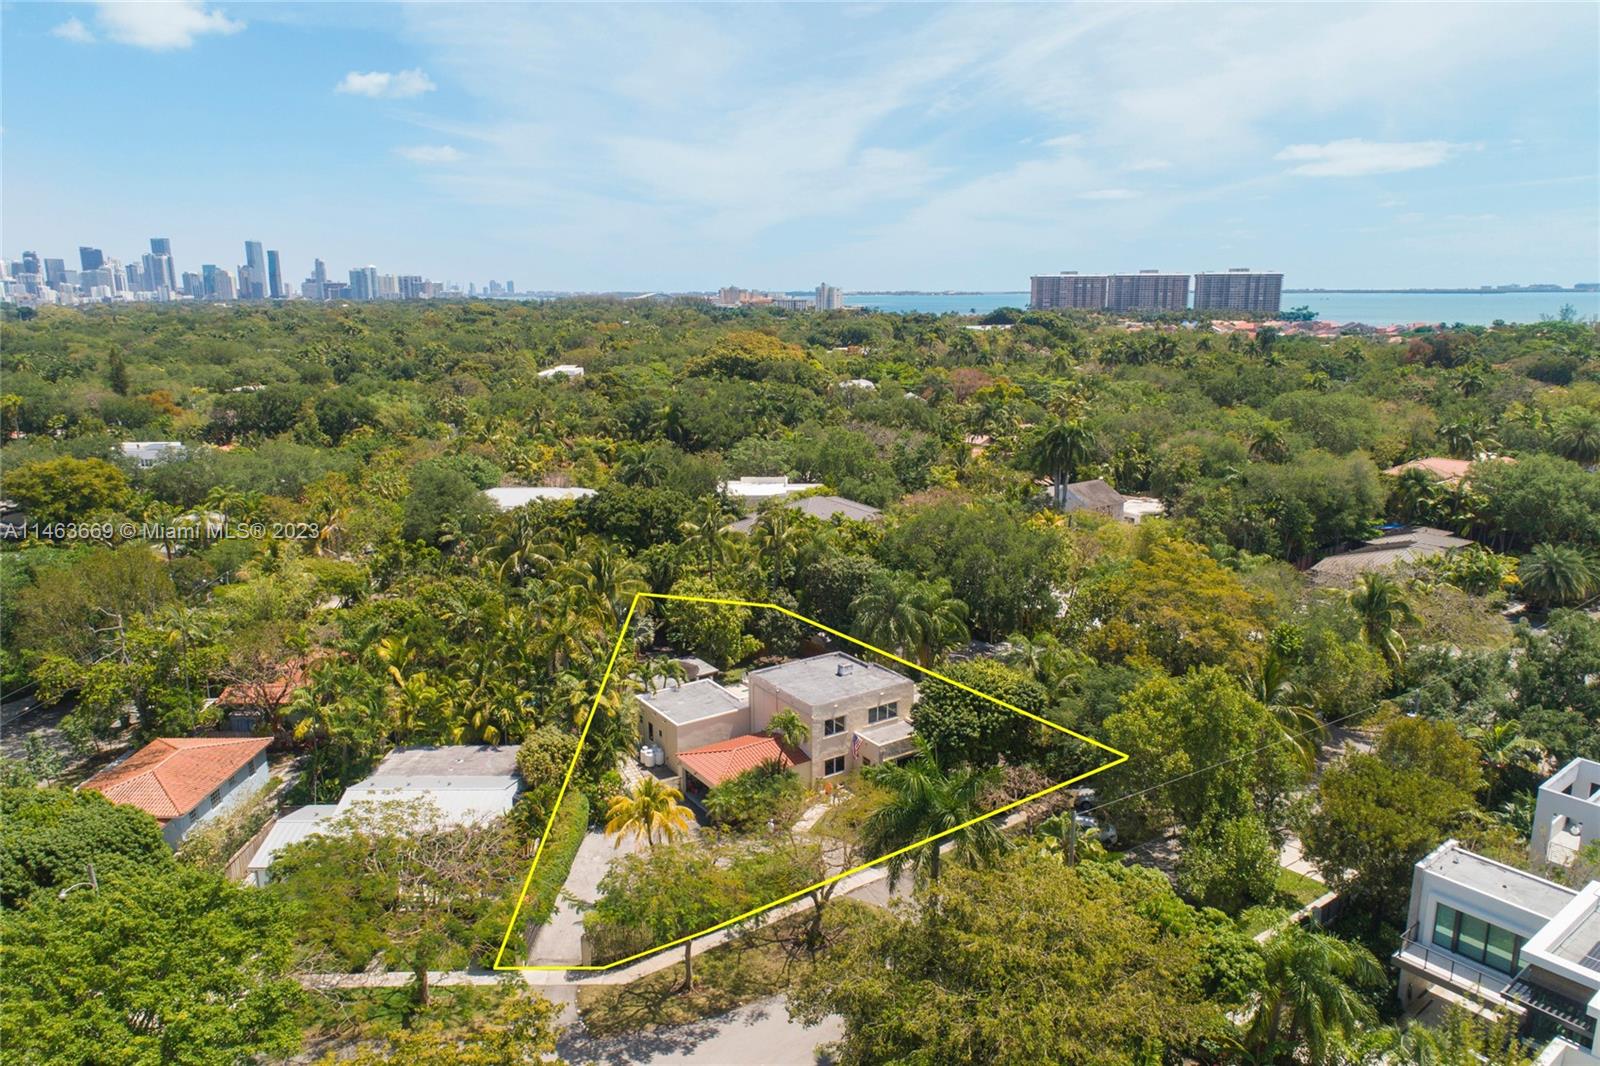 Large 14,226 SF lot with approved plans for an approximately 4,500 SF tropical modern new construction home on a great street in North Coconut Grove. Rare opportunity to build your dream home on an oversized lot in Miami's hottest neighborhood. Walk to waterfront parks & marinas, great restaurants & entertainment, and all that Coconut Grove has to offer. Short drive to Downtown Miami, Coral Gables and Miami Beach. Price does not include demolition of existing home or new construction. Plans available upon request.